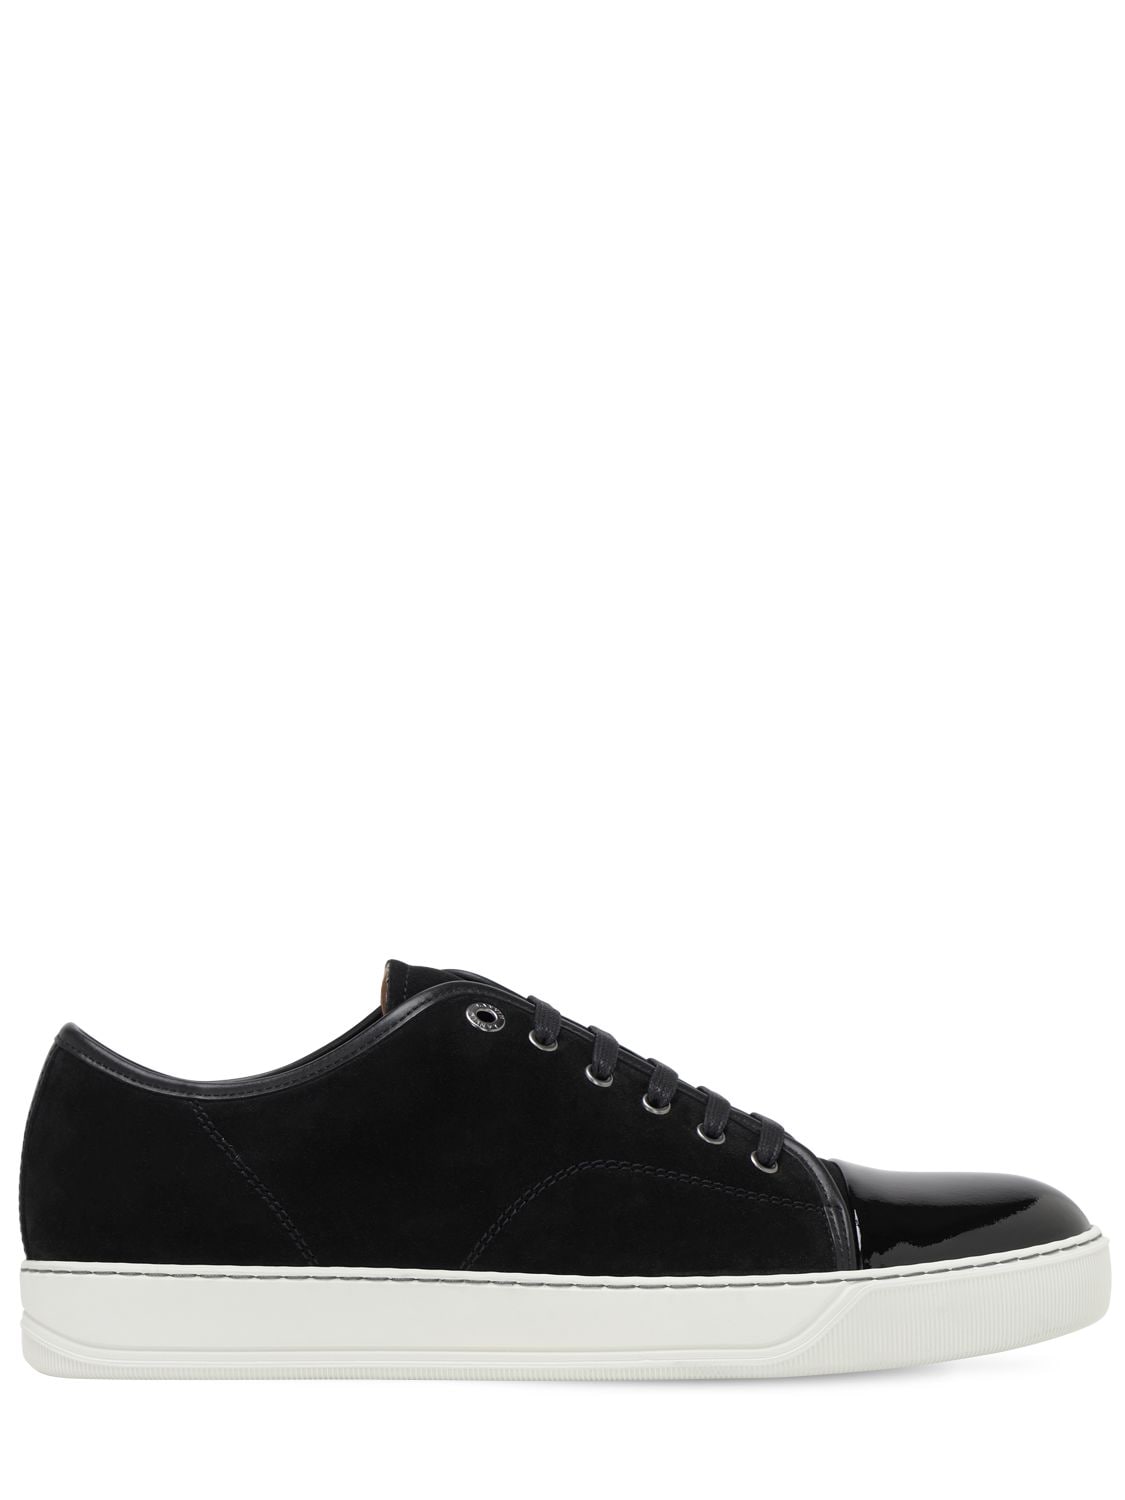 Lanvin Suede & Leather Low Top Sneakers In Black